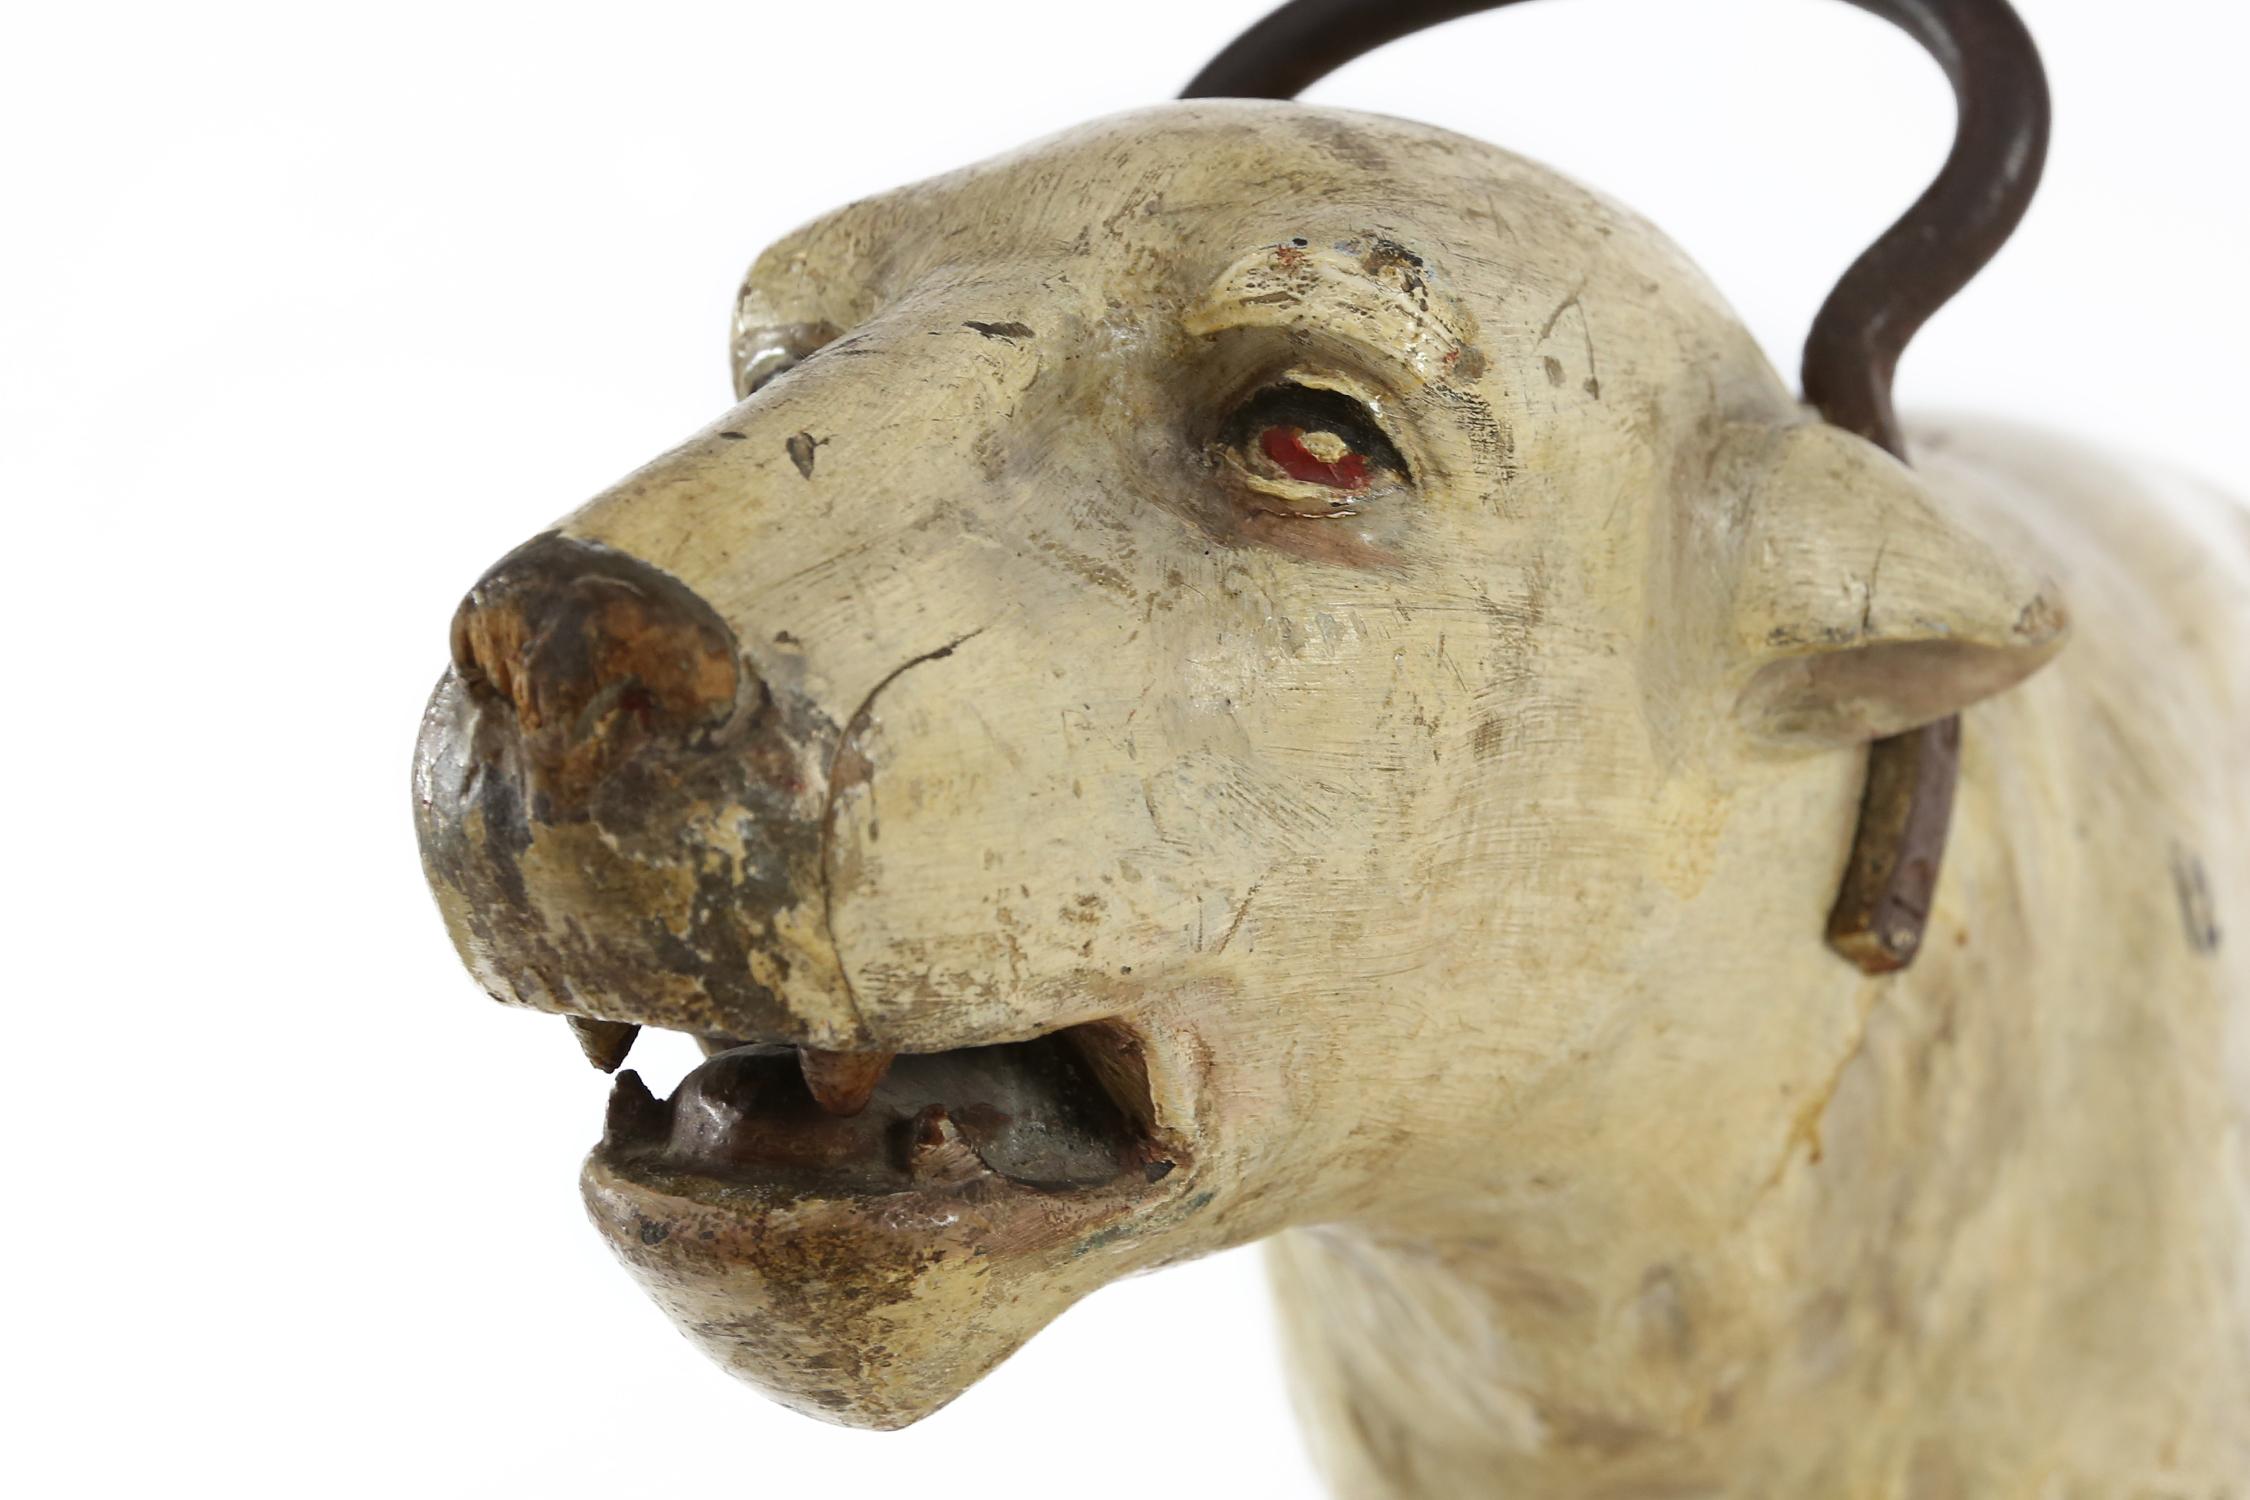 An early 20th century carousel polar bear in carved and painted wood by Bernard van Guyse, Belgium, from the famous Noah's ark carousel. This polar bear is a remarkable example of Bernard van Guyse's wood-carving talents. A trained sculptor, van